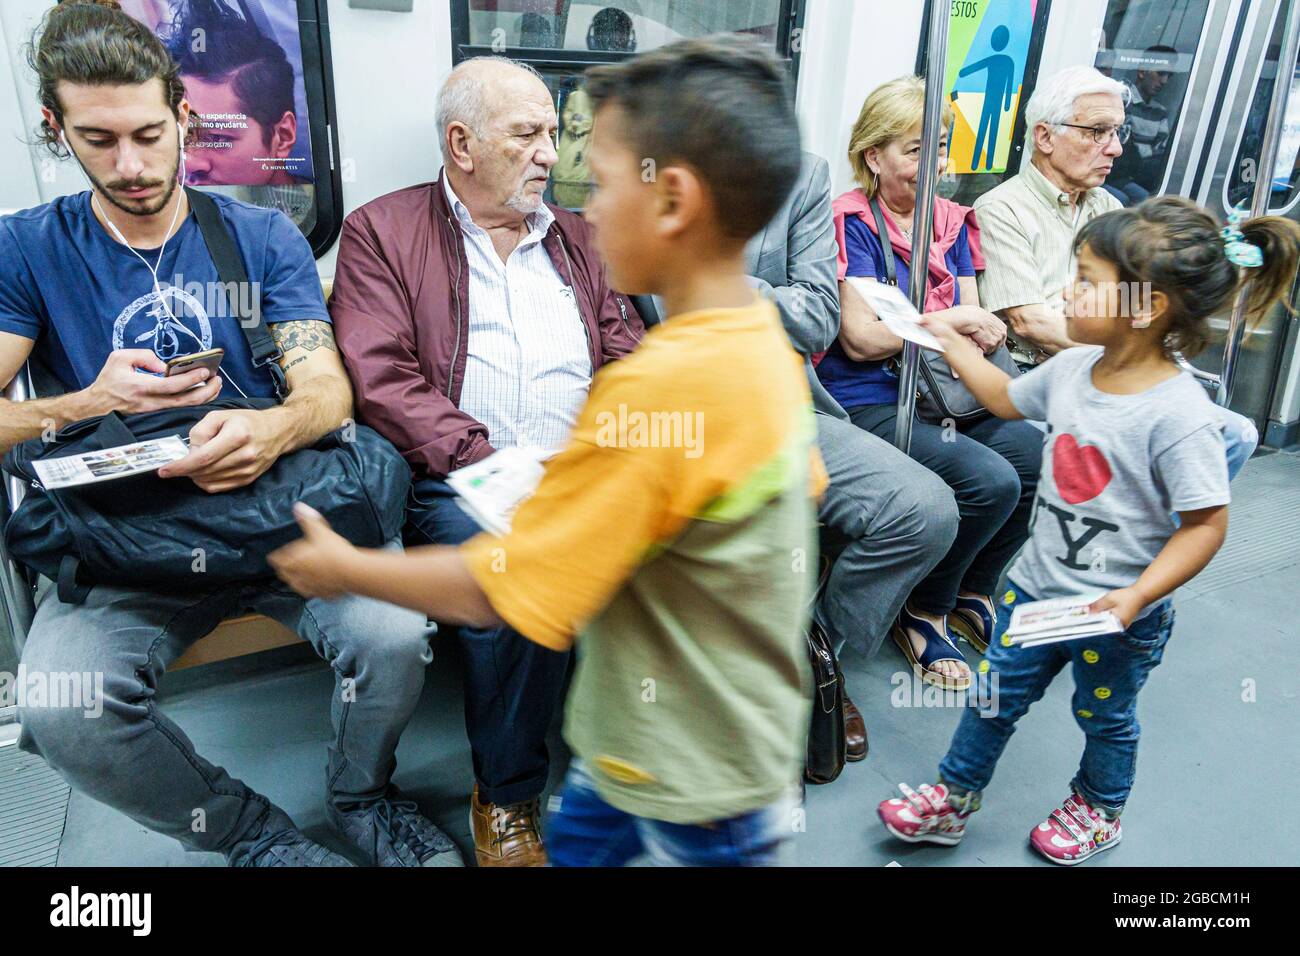 Argentina Buenos Aires,Subte subway public transportation moving train girl boy commuters,child labor selling begging cabin car interior inside passen Stock Photo